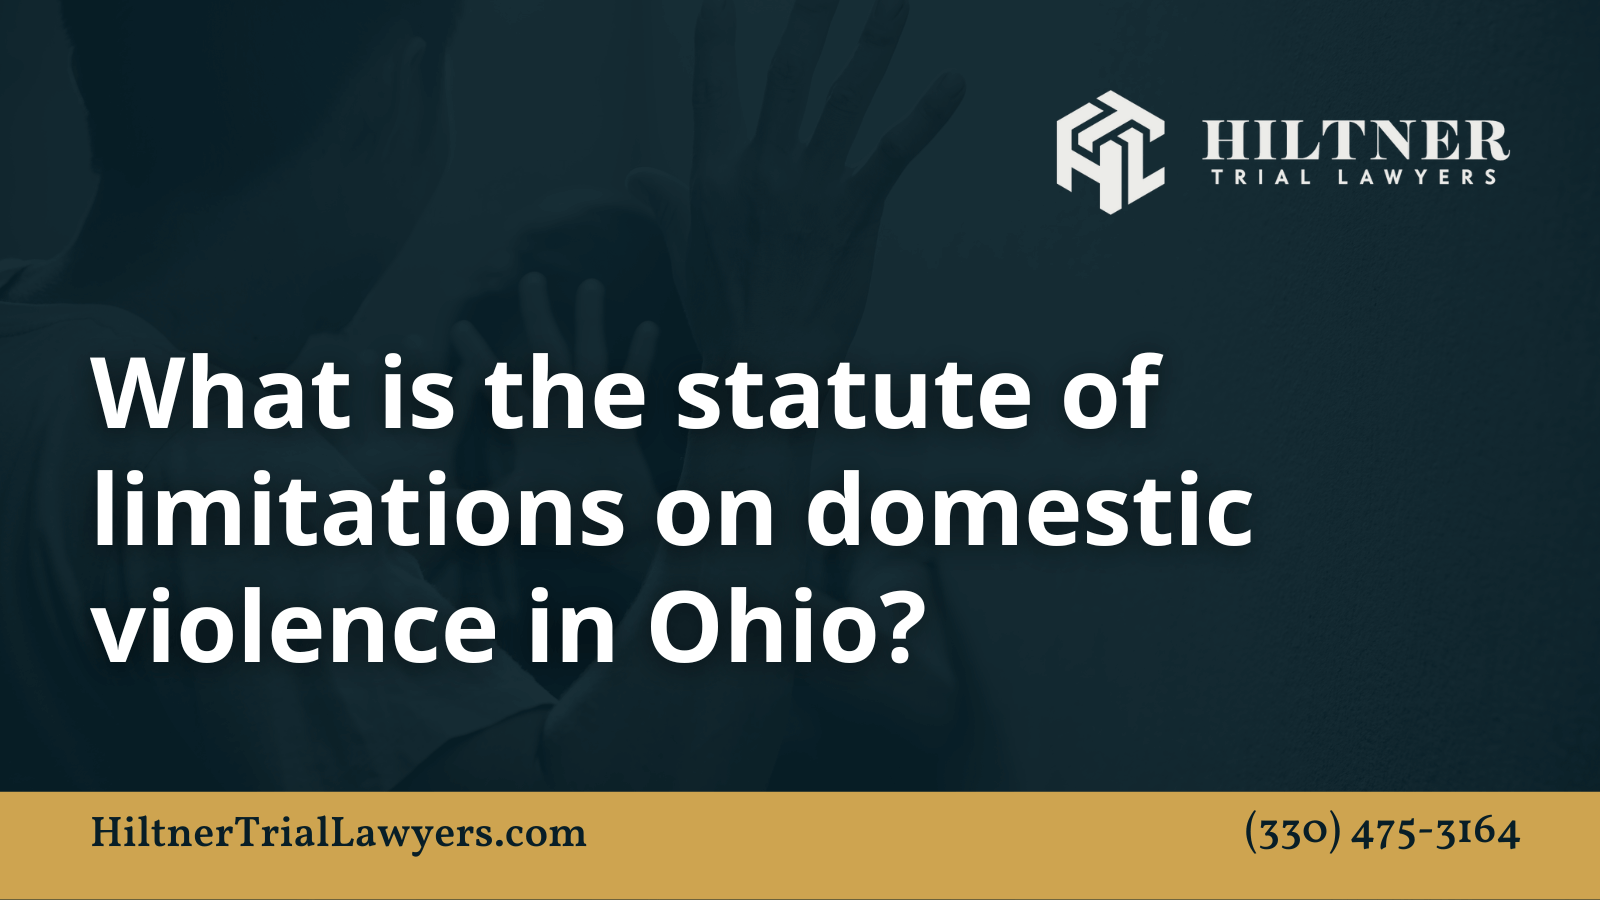 What is the statute of limitations on domestic violence in Ohio - Hiltner Trial Lawyers Ohio - max hiltner